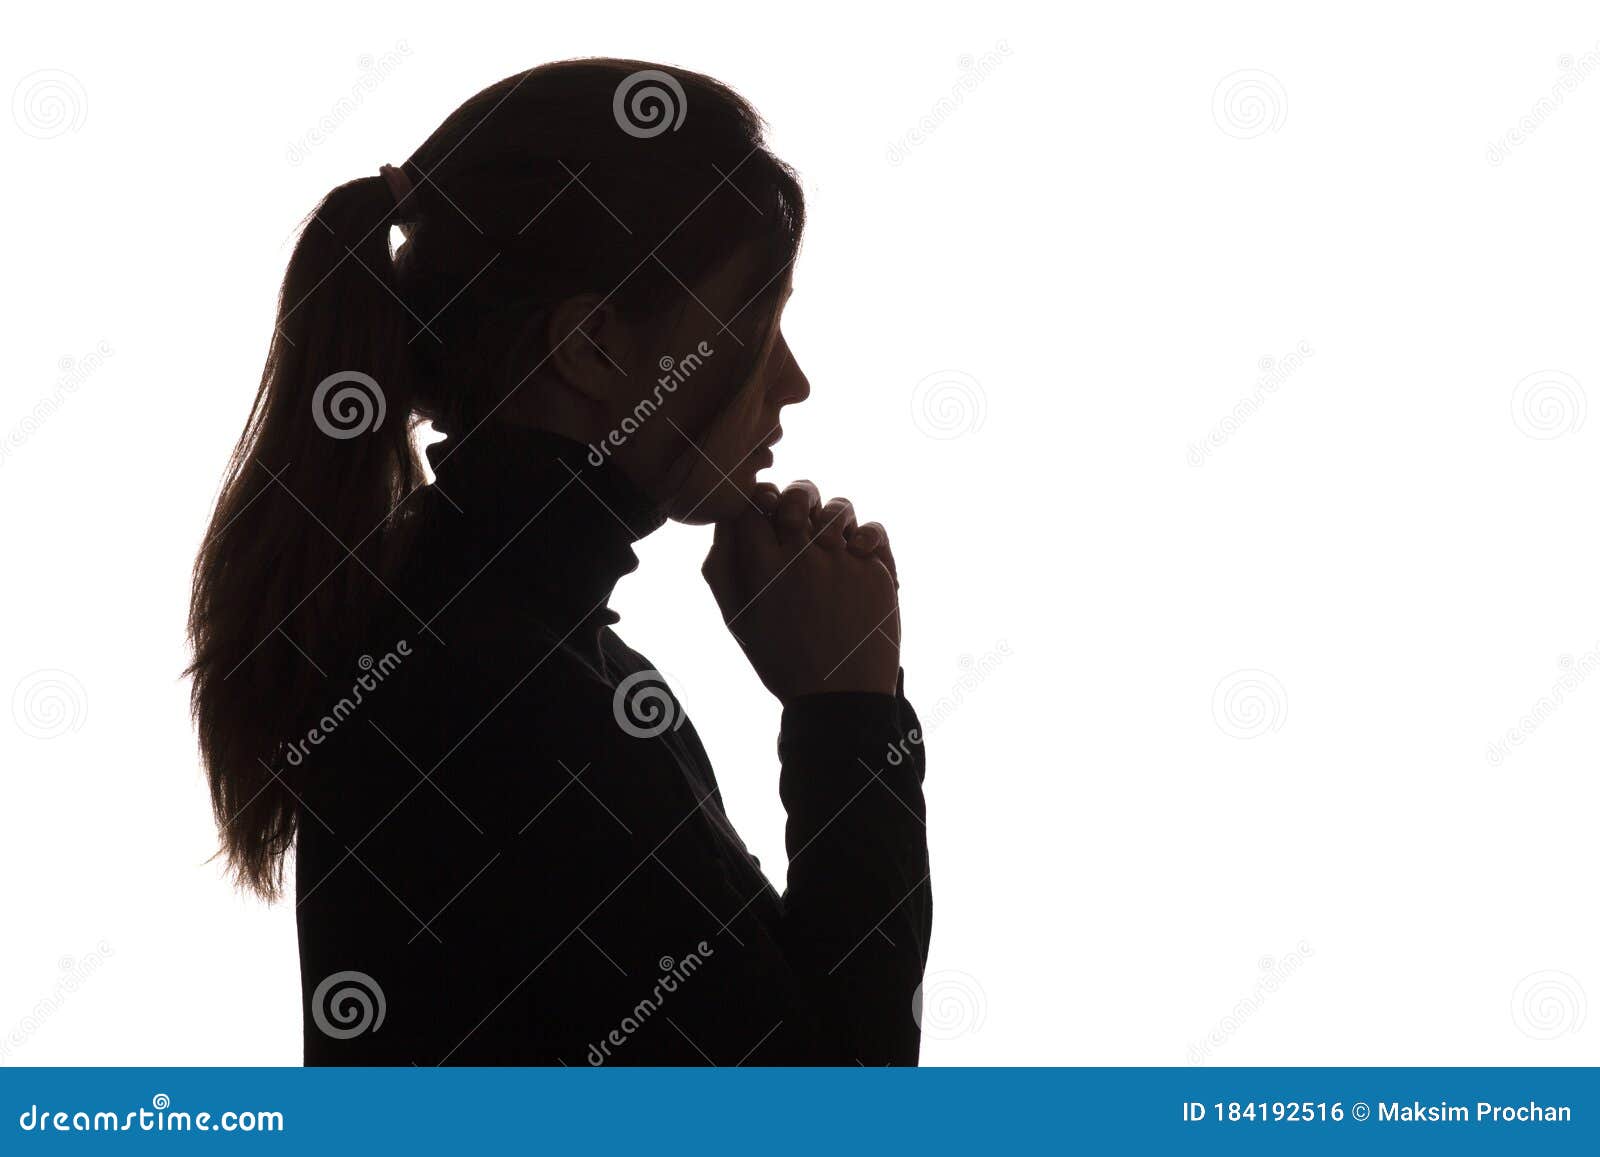 Sad Silhuette Of A Girl, Profile Photo Stock Photo, Picture and